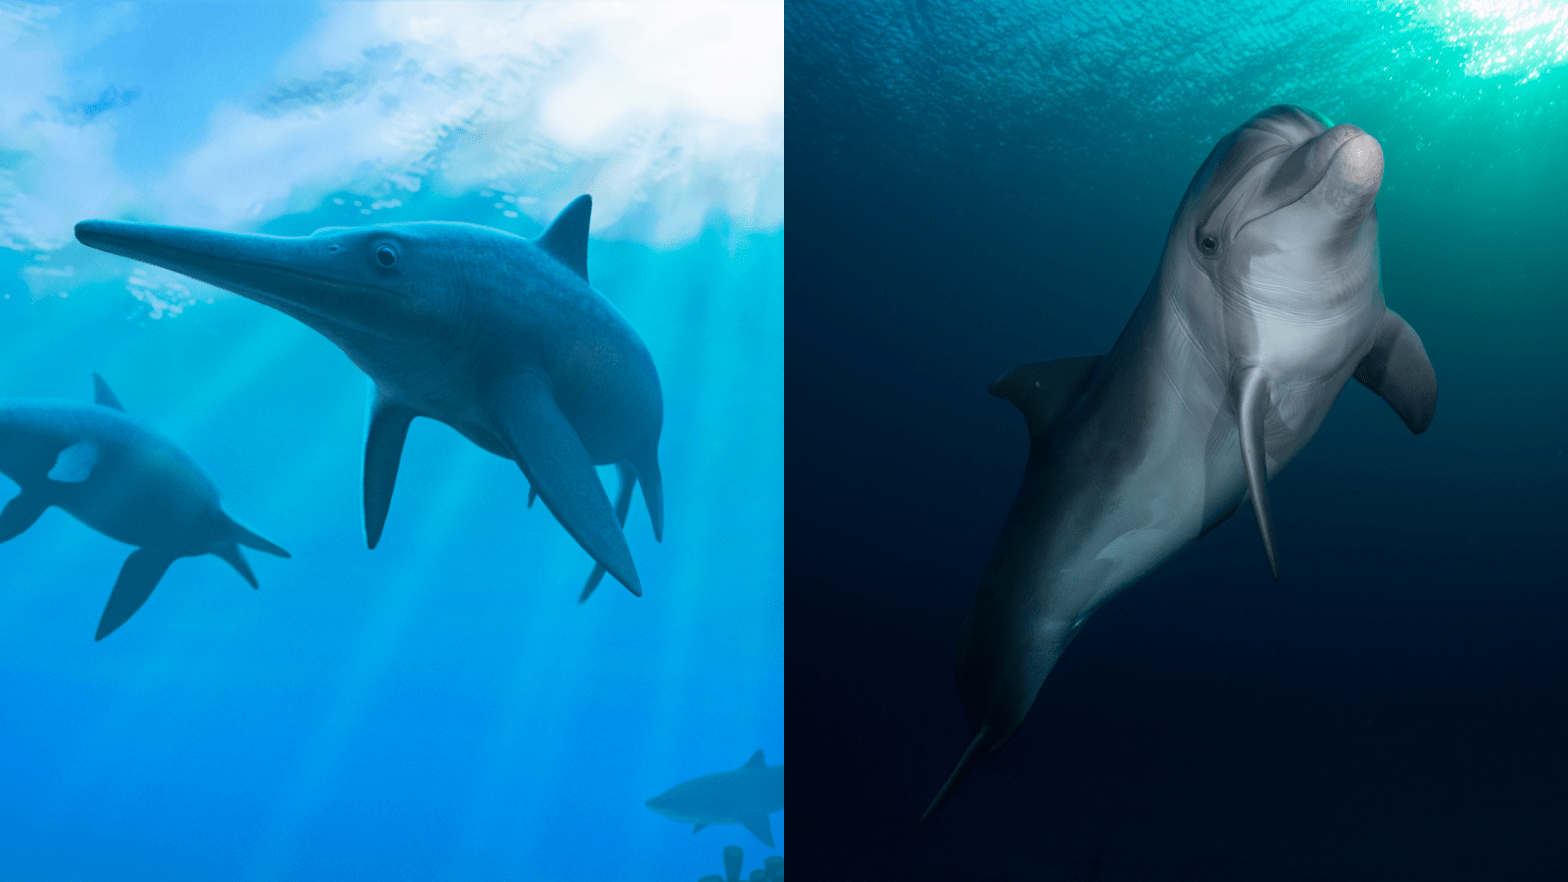 Left: Artist's impression of extinct ichthyosaurs. Right: A modern dolphin. (Image: Andrey Atuchin/ טל שמע (Wikimedia Commons)